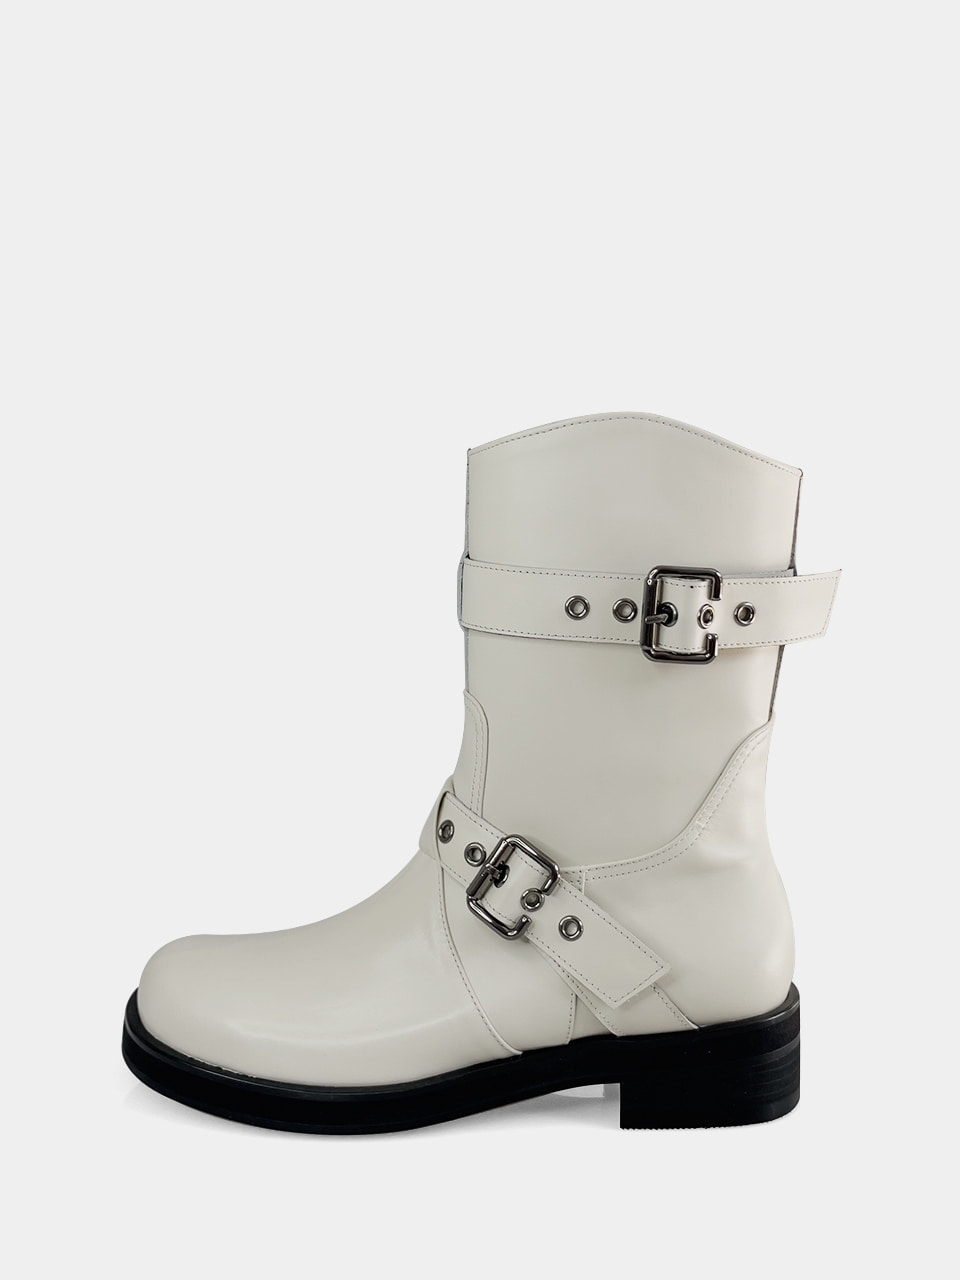 Mrc092 Nickel Middle Boots (Ivory)